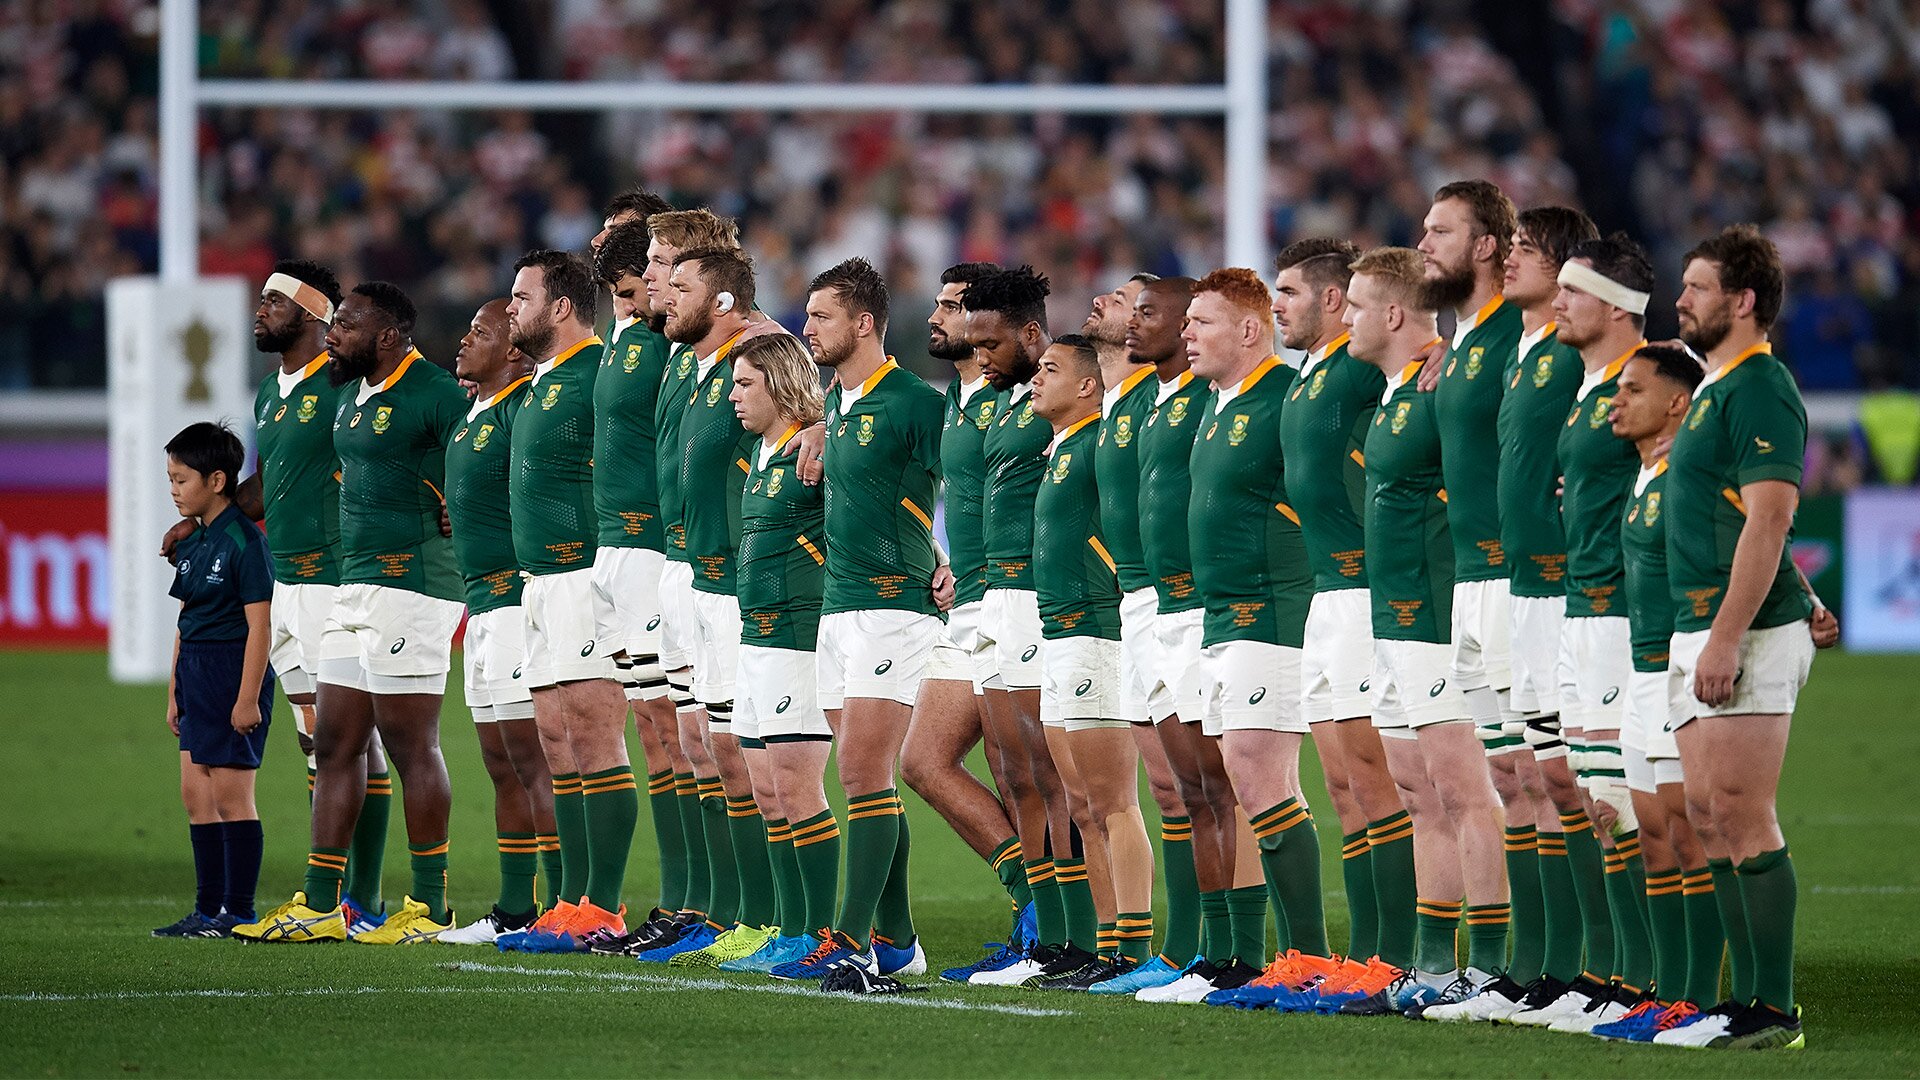 Springboks Name Two Uncapped Players To Start Versus Georgia With Wiese On The Bench